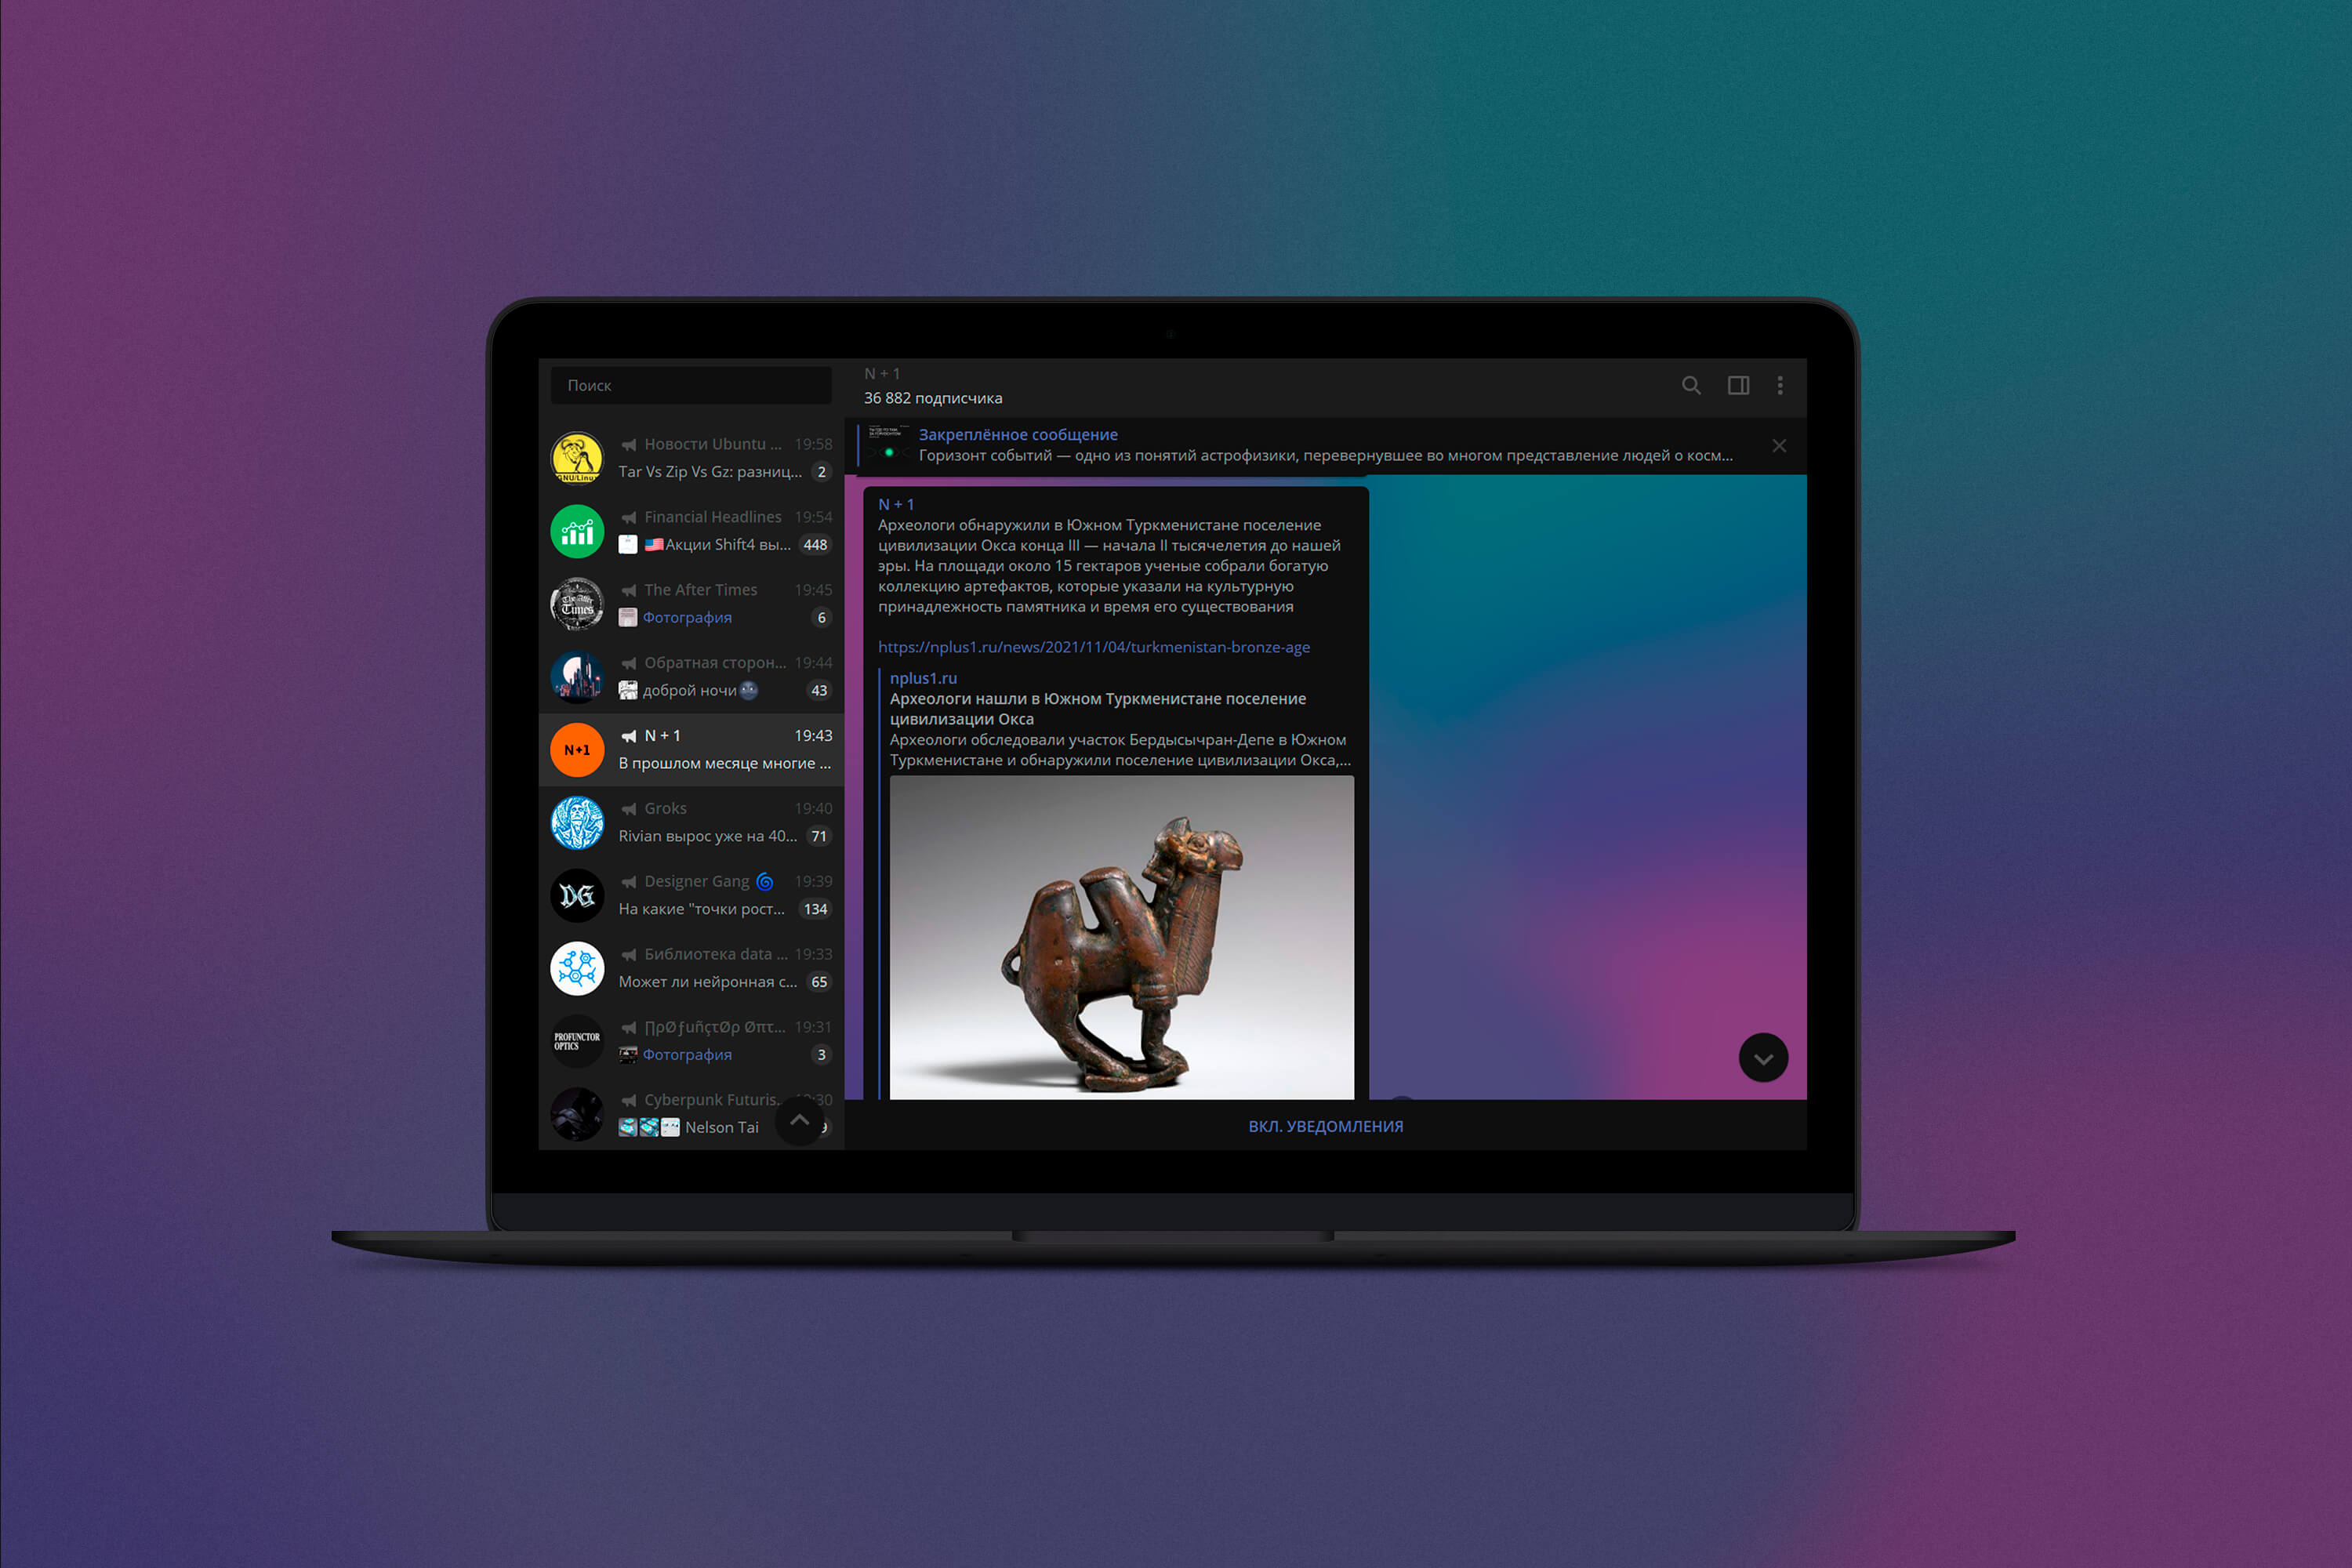 A dark theme with a touch of purple designed for an official Telegram contest